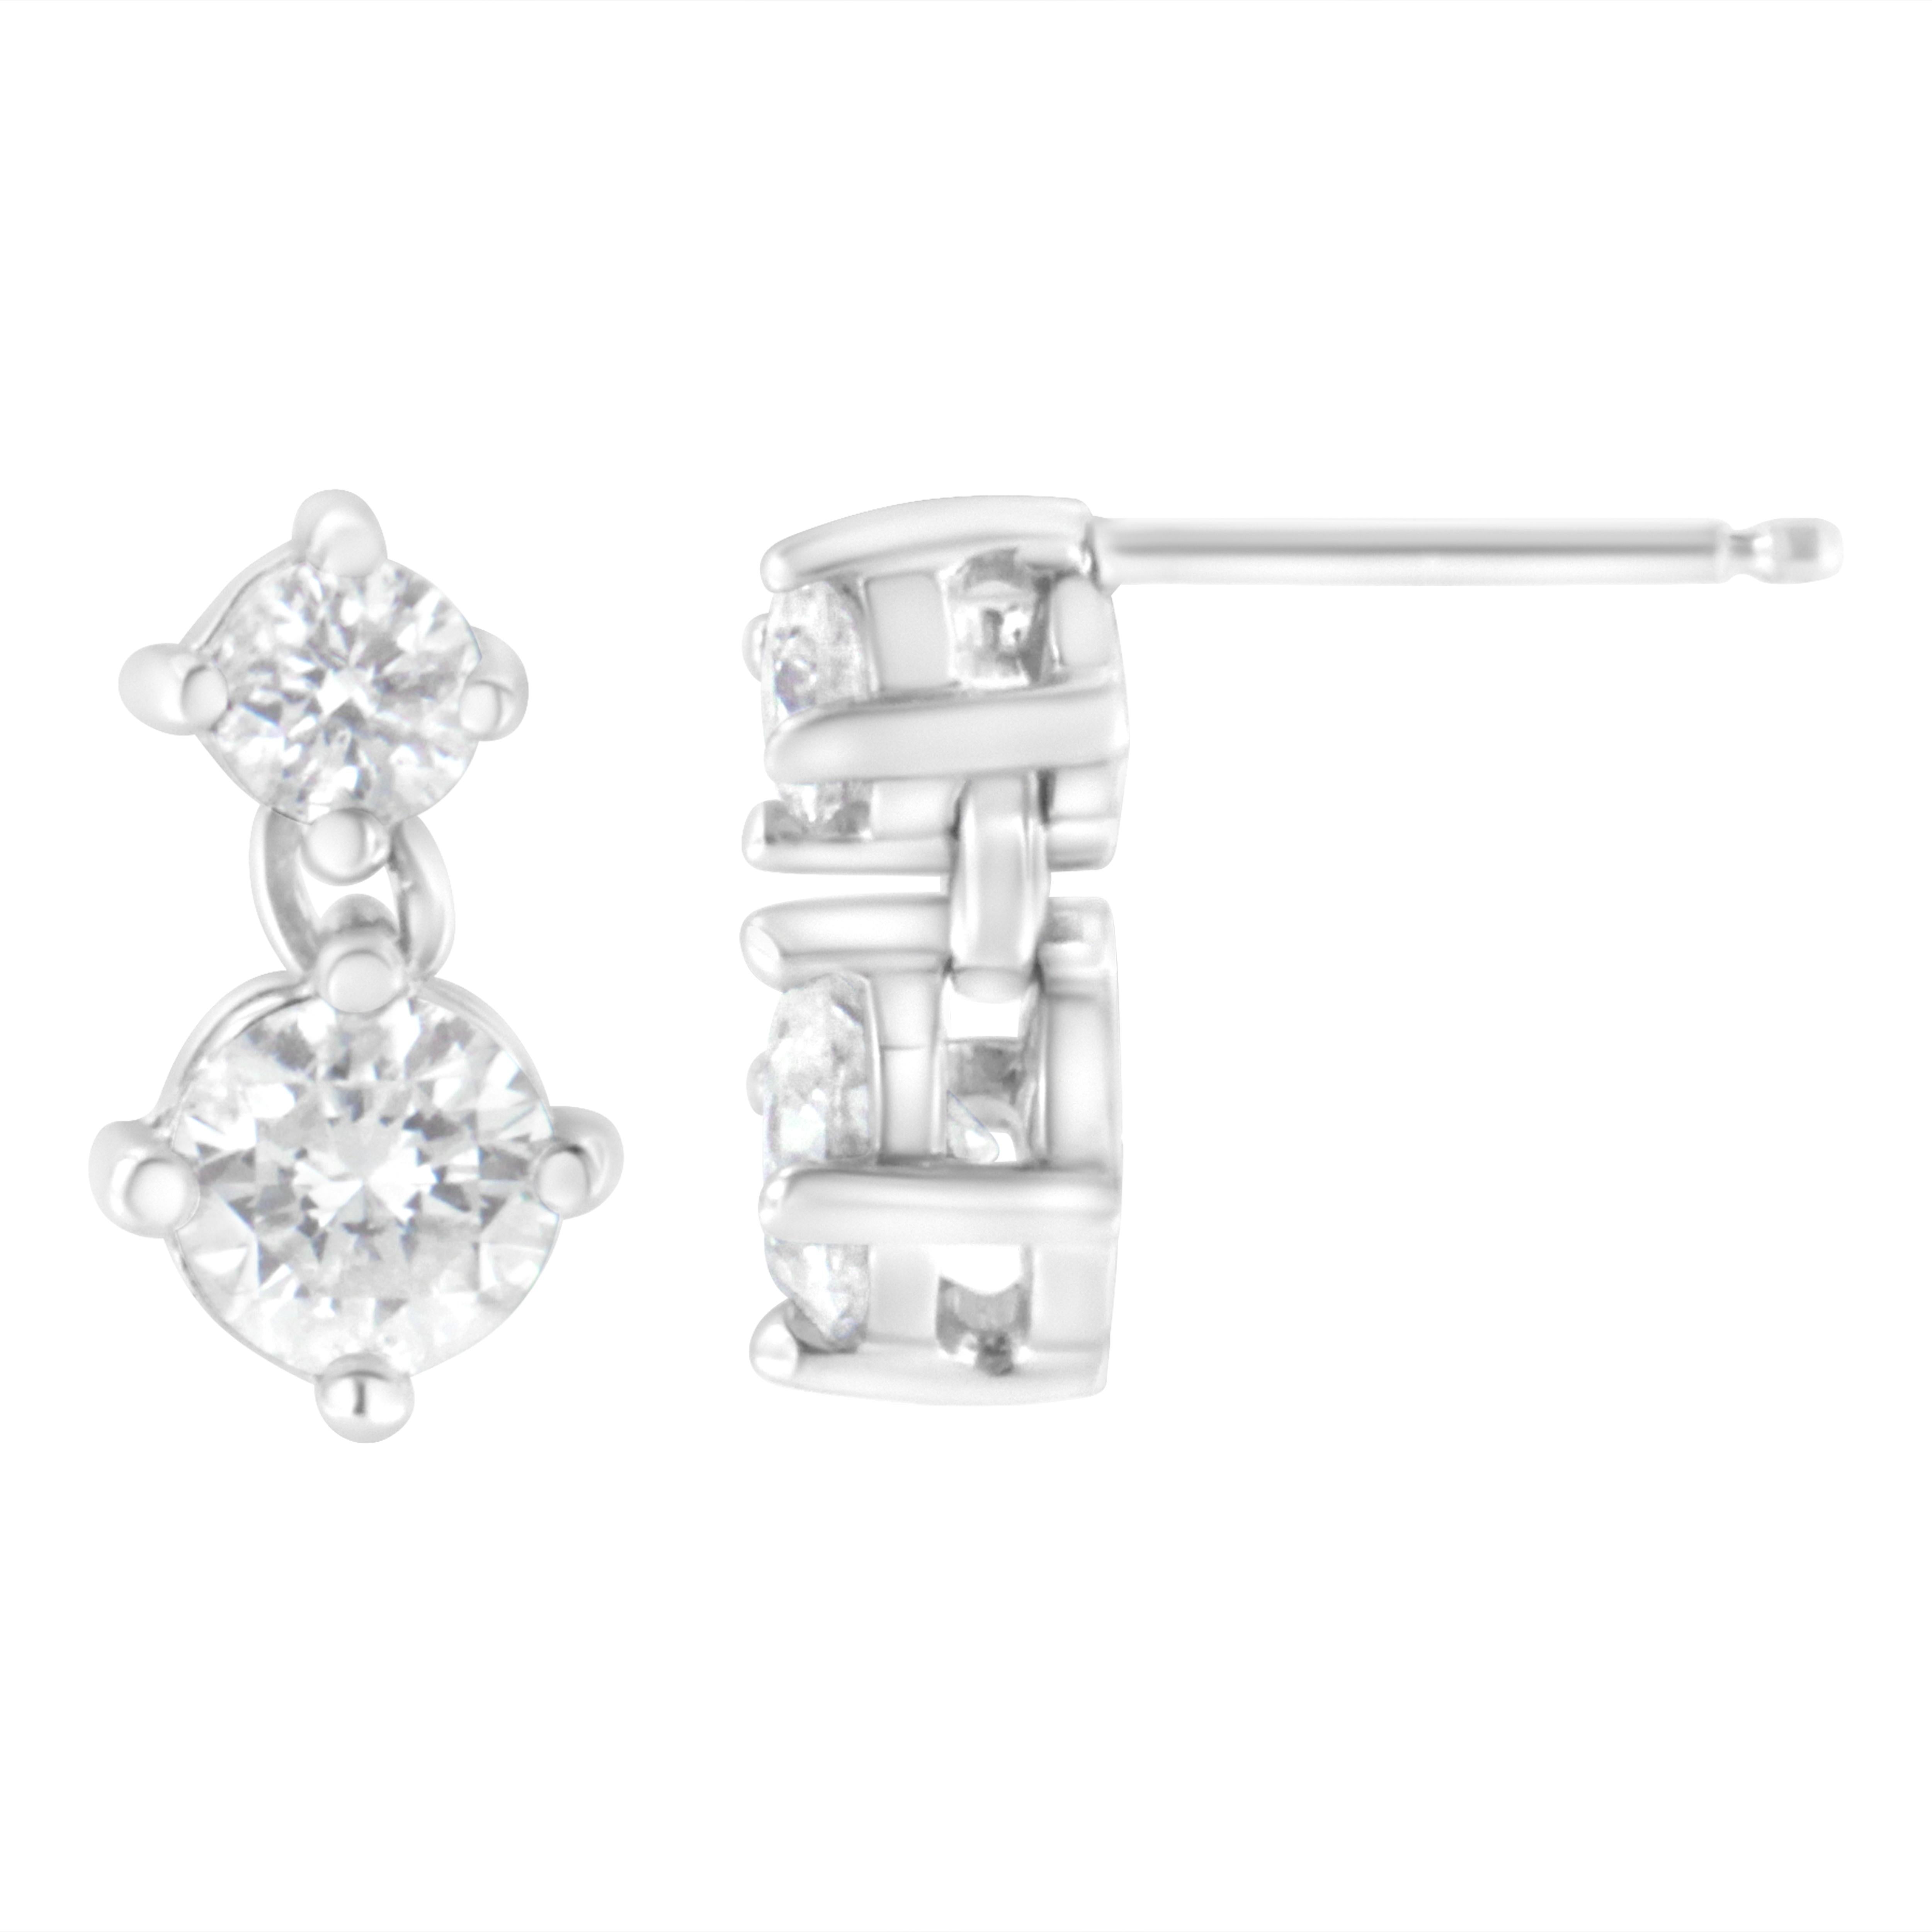 Accent your look with this chic pair of stud earrings. Composed of precious 14k white gold, these gorgeous earrings are finely burnished to shine. Further, the embellishment with flickering round cut diamonds in a prong setting giving this piece a